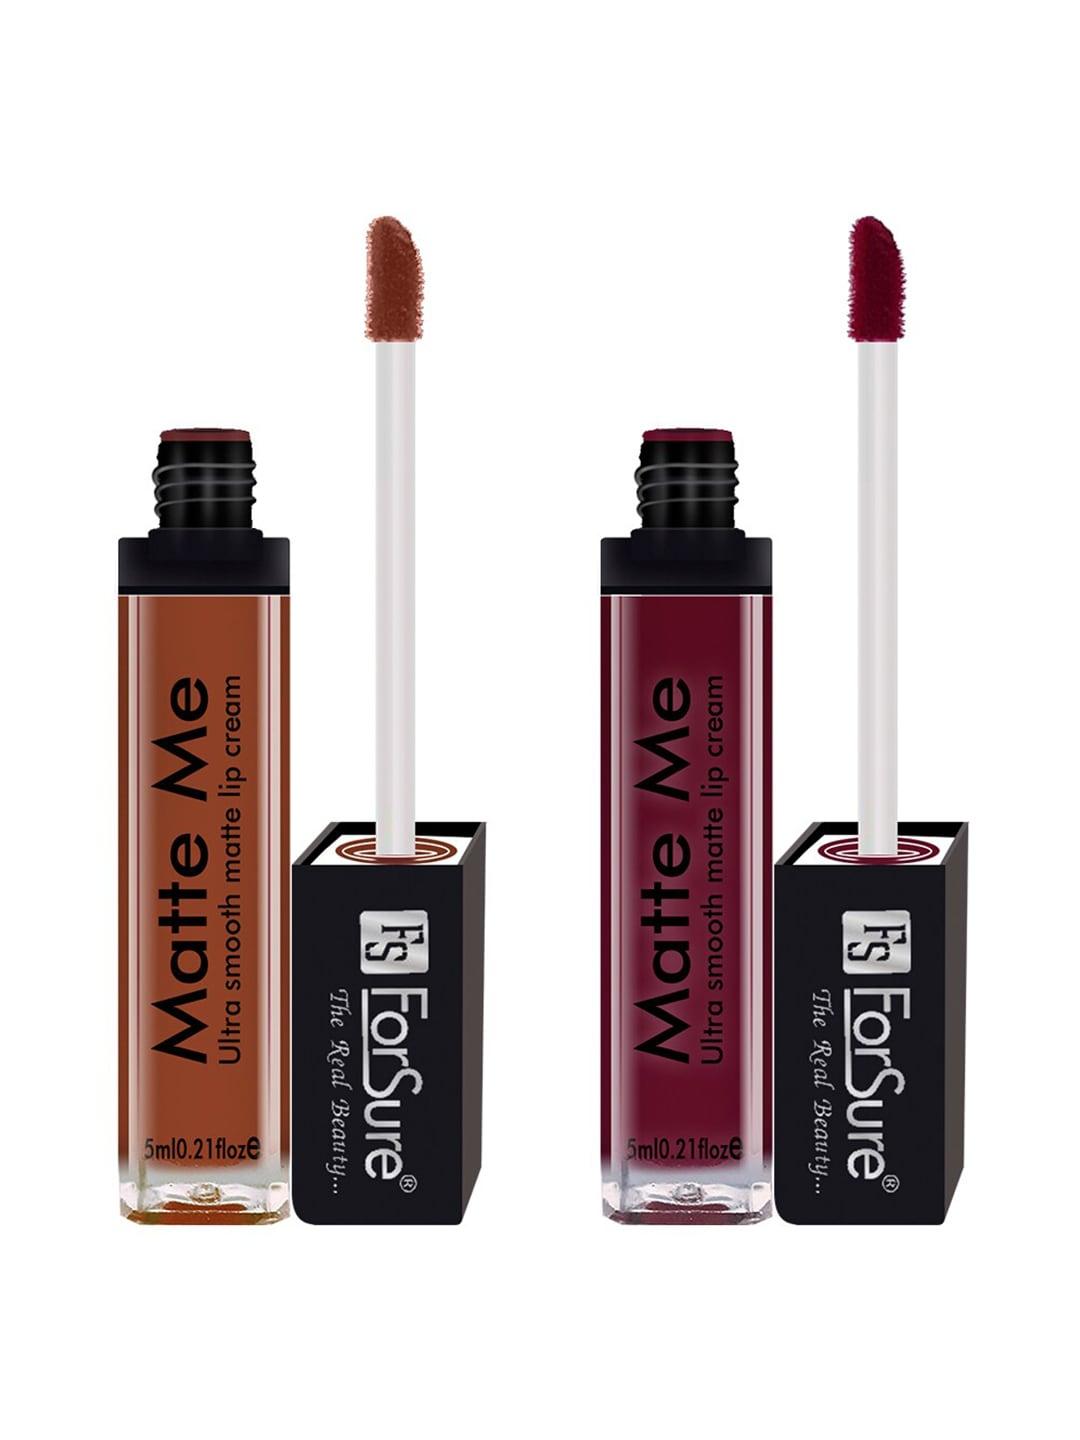 ForSure Set of 2 Matte Me Ultra Smooth Liquid Lip Cream 5 ml Each - Rust Brown & Ruby Red